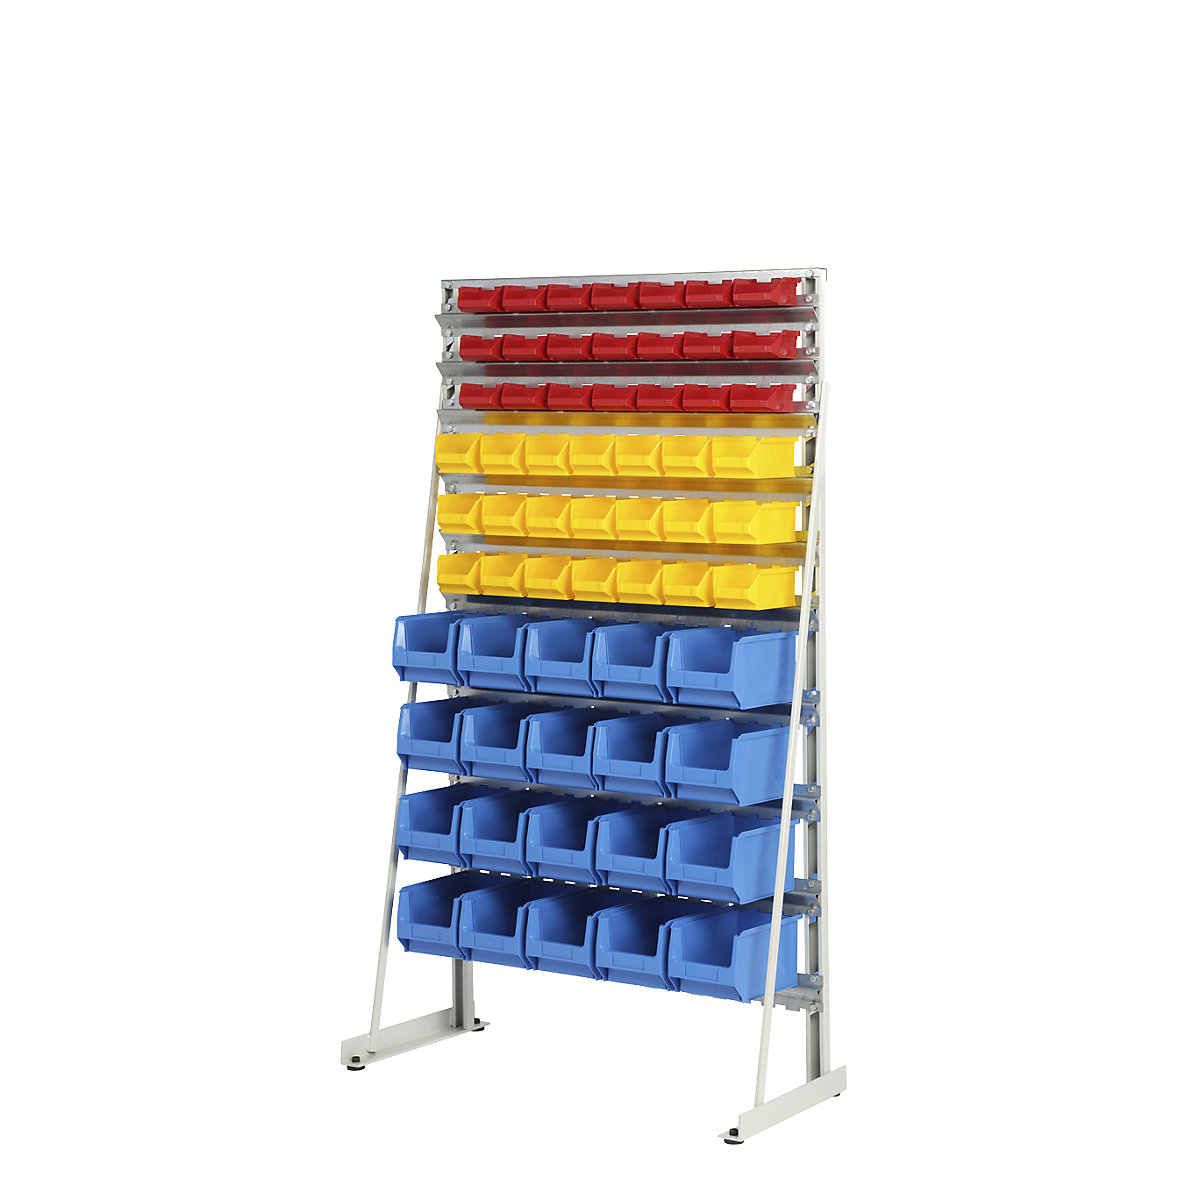 Free-standing small parts shelf unit with open fronted storage bins – eurokraft pro, single sided, with 62 open-fronted storage bins-3